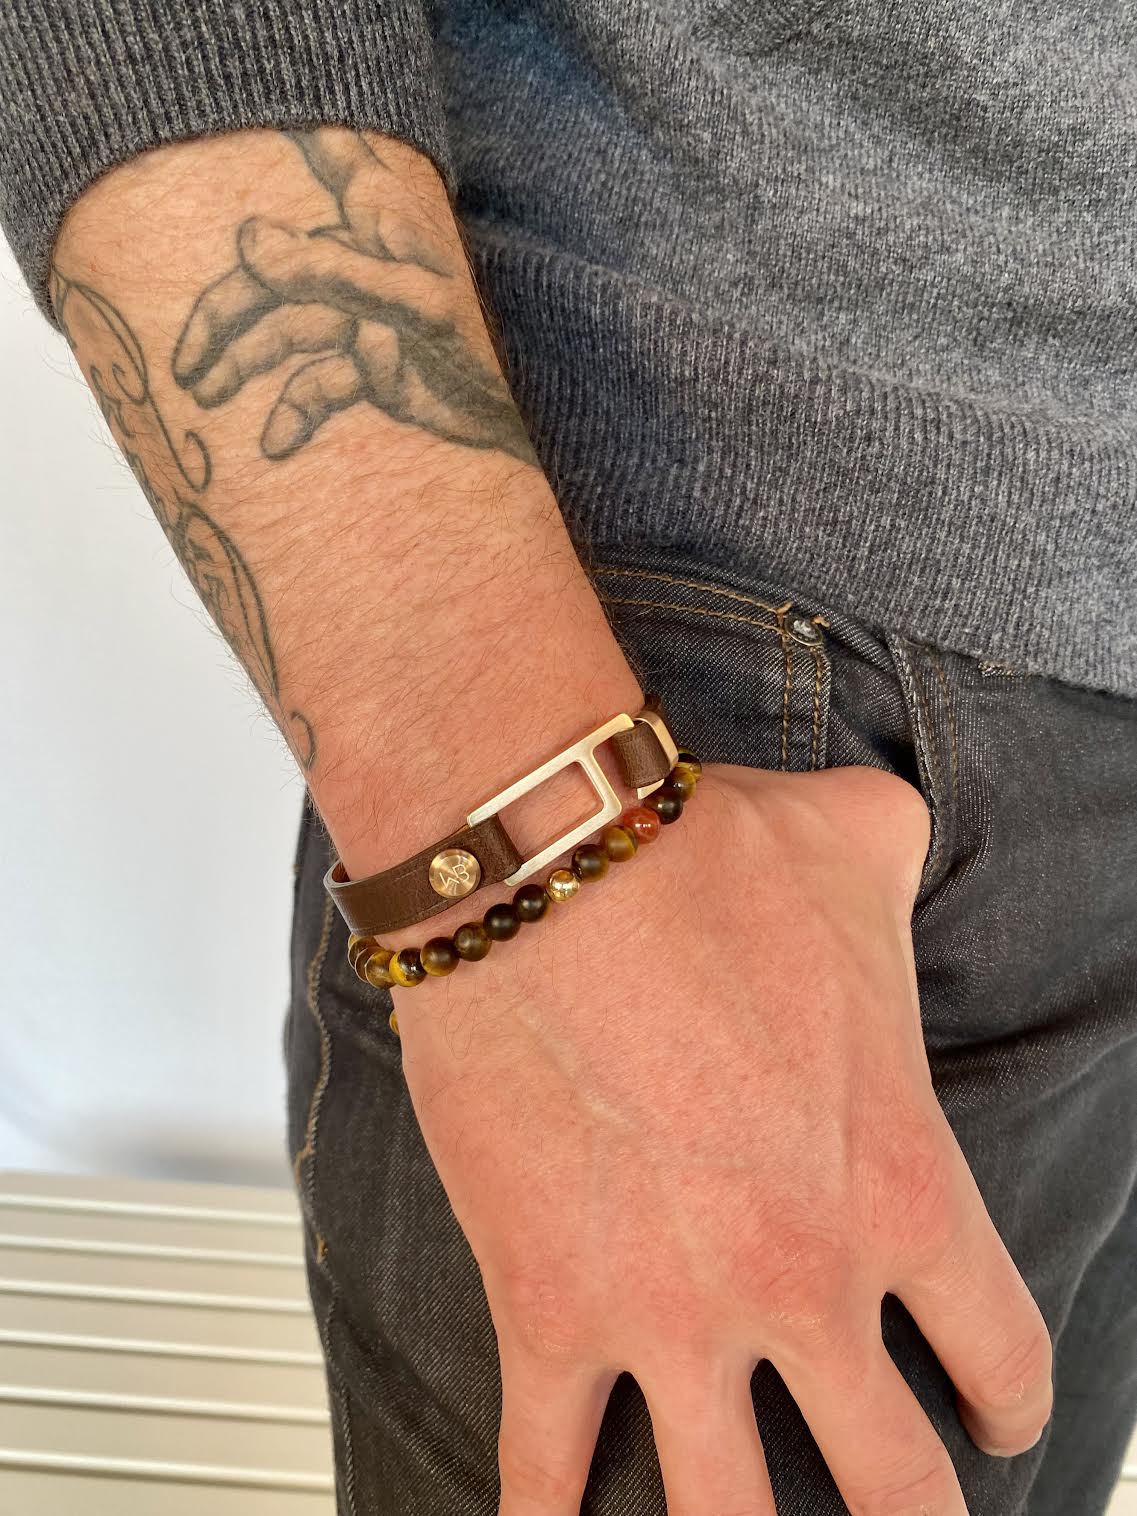 Our striking dark brown/tan Italian leather bracelet is paired perfectly with our artisan designed, lightly brushed hardware. Your hardware choices include Rose Gold, Yellow Gold, Stainless Steel or Black Ceramic. This adjustable size bracelet is a distinctive piece worn alone or with a WristBend stacking bracelet. Made by WristBend